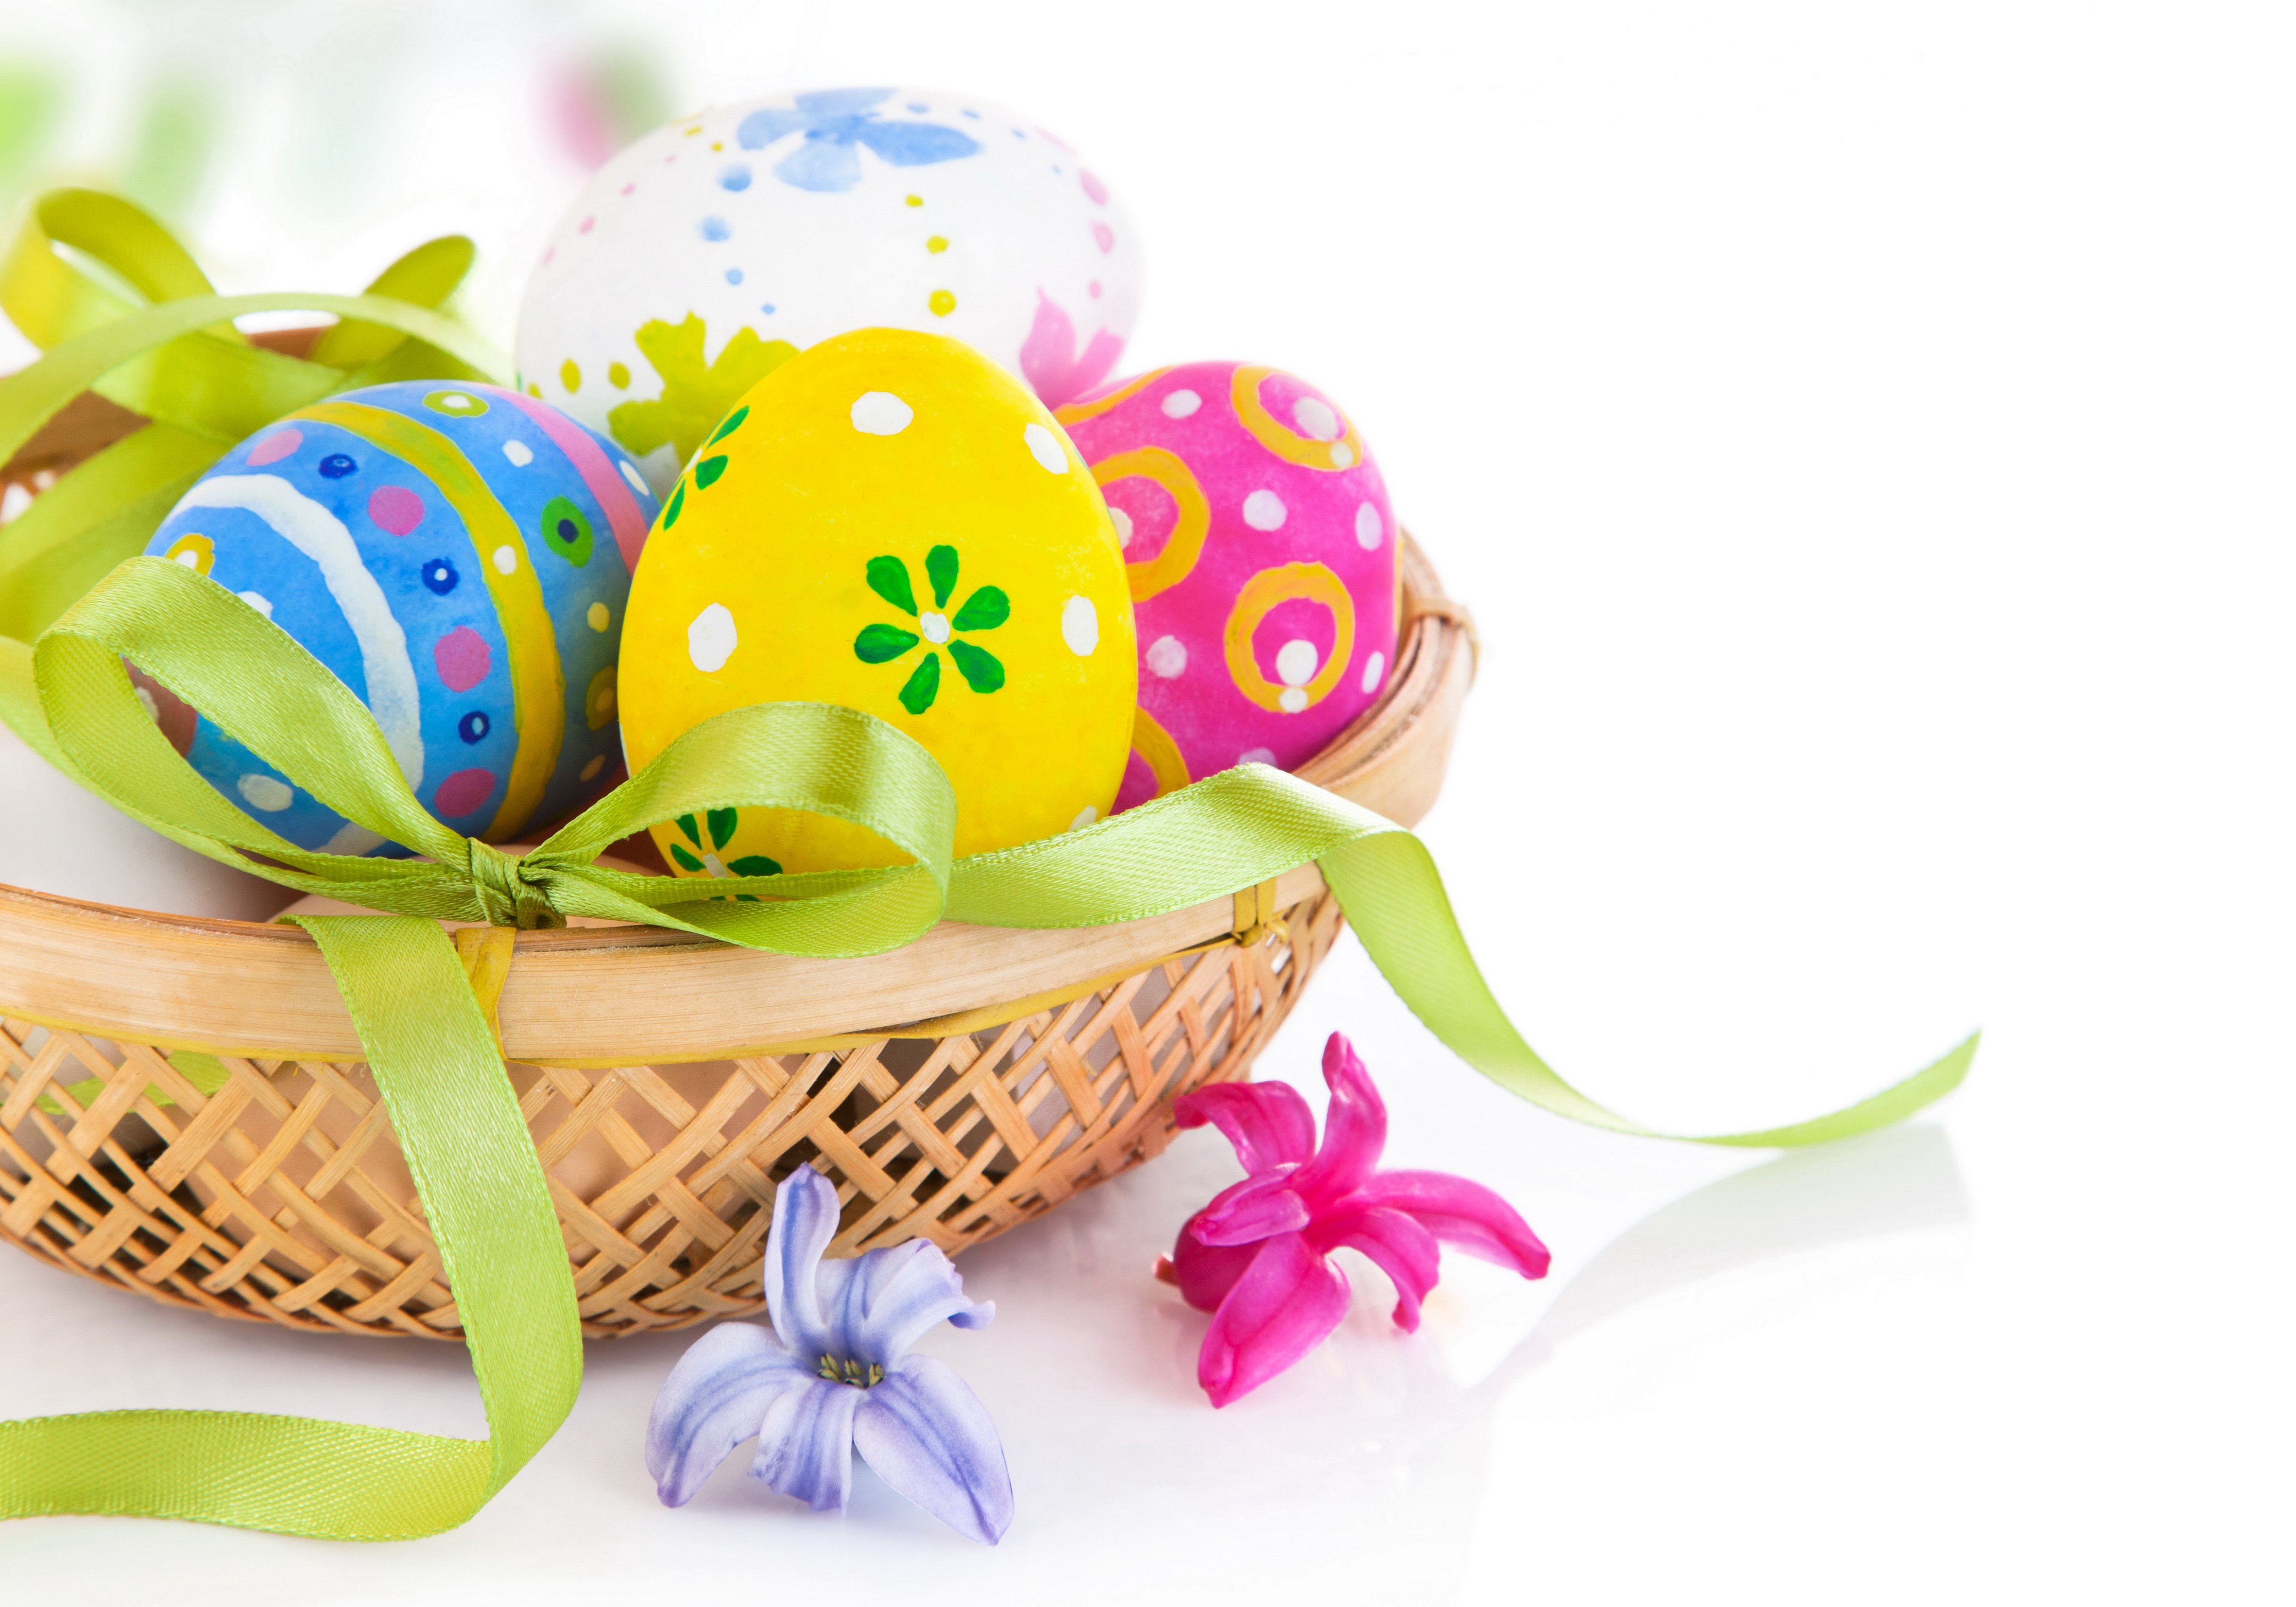 Knot Holidays Easter Wicker Basket Eggs Bowknot Wallpaper